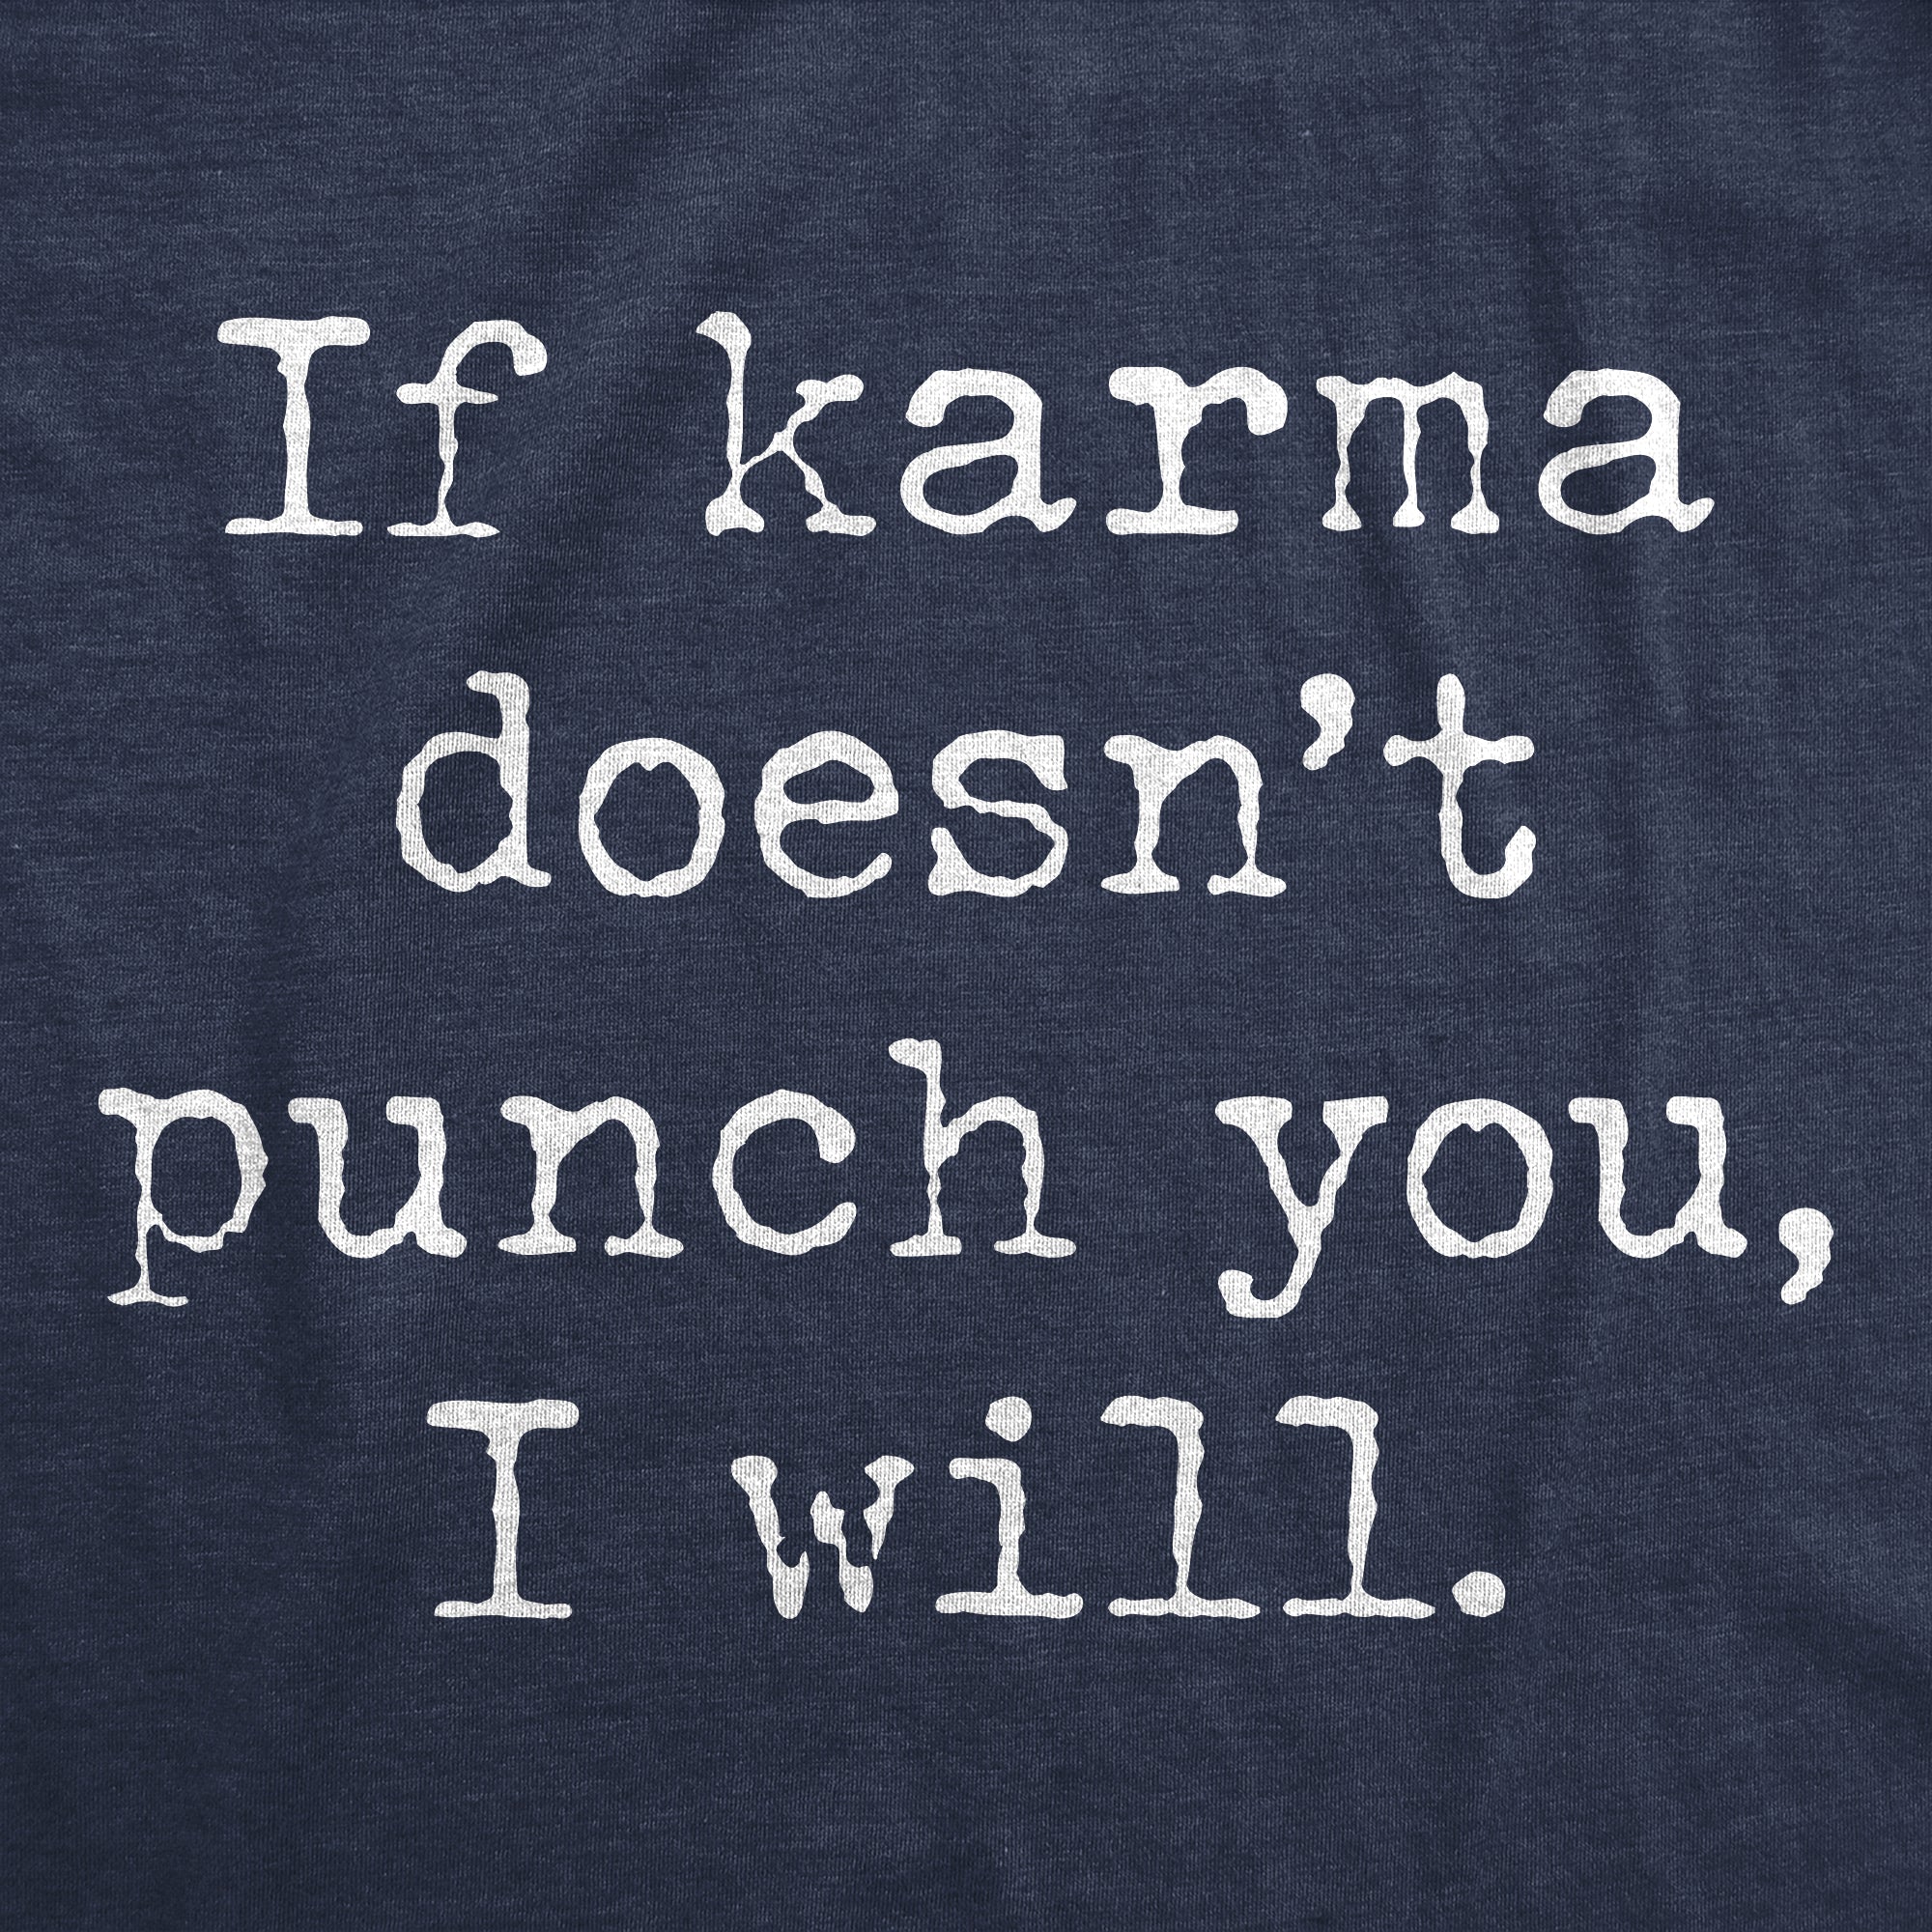 Funny Heather Navy If Karma Doesnt Punch You I Will Womens T Shirt Nerdy Sarcastic toilet Tee